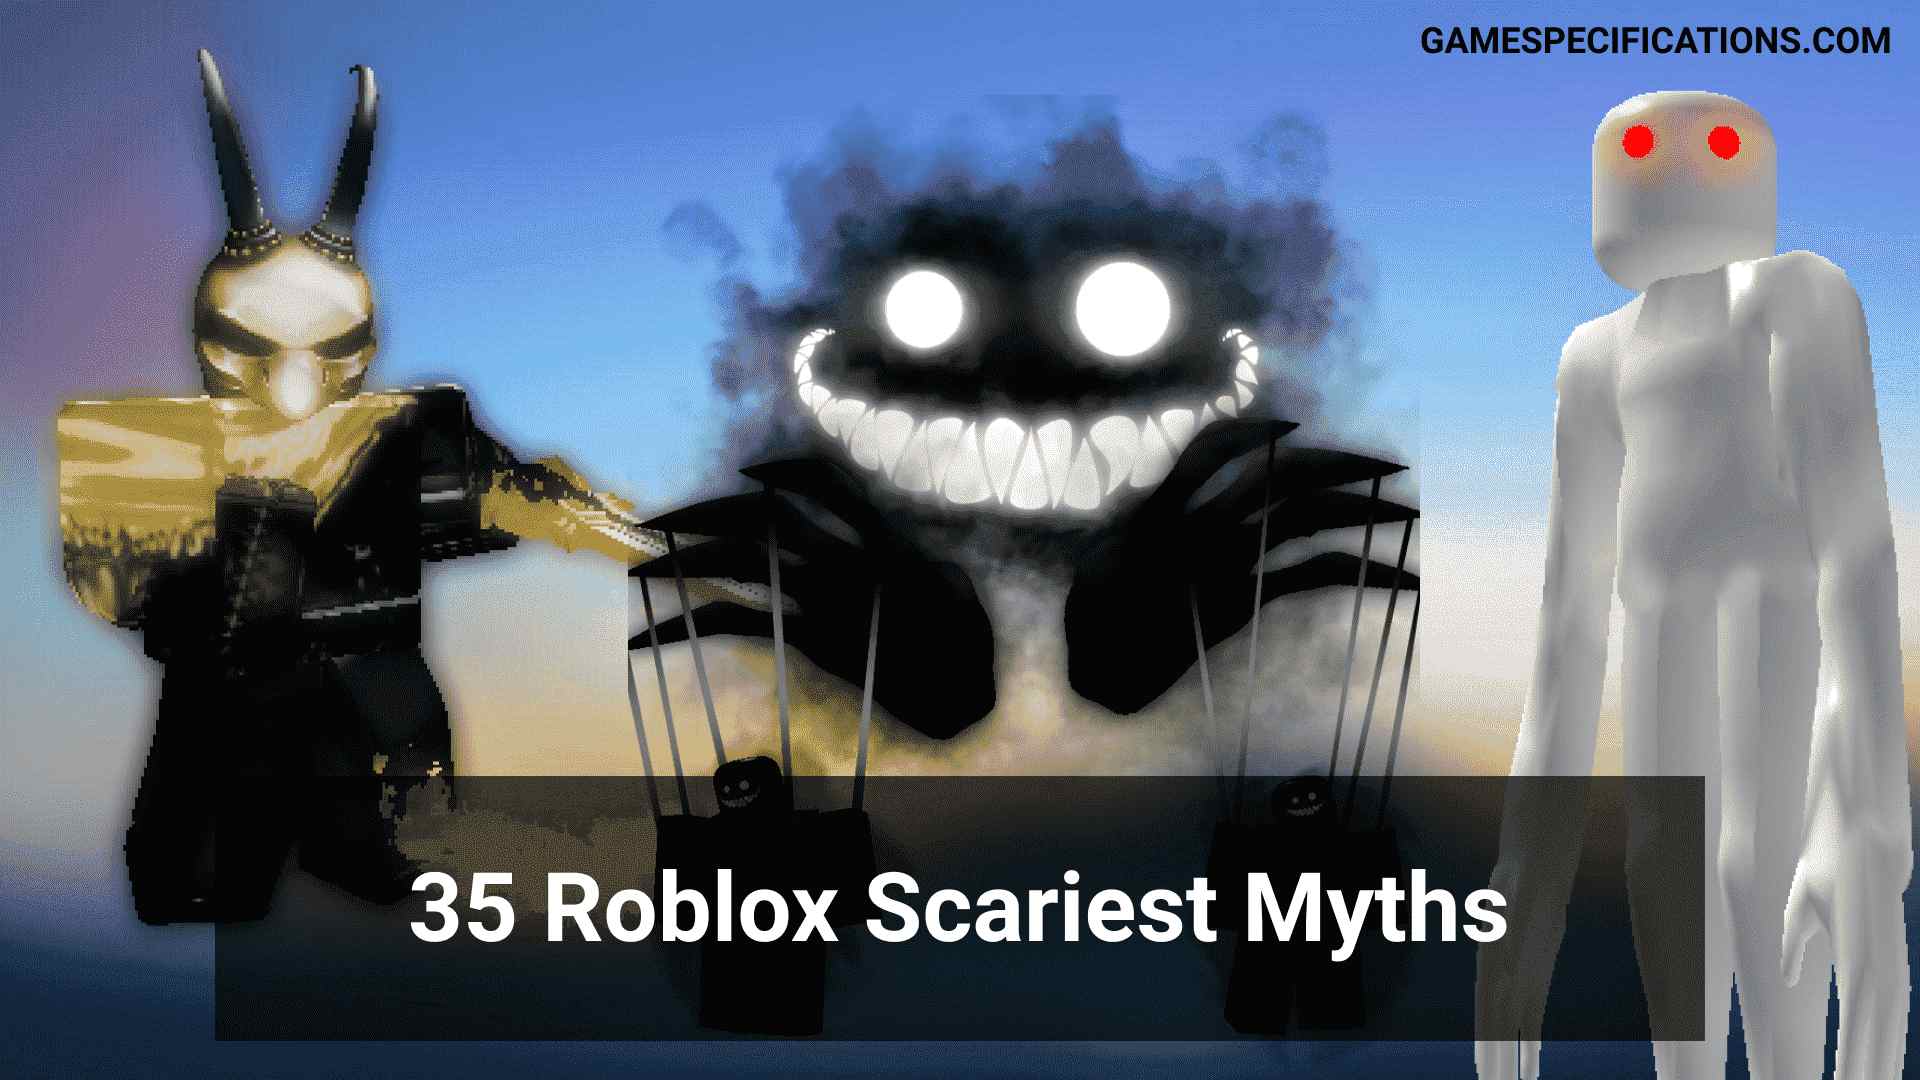 Roblox Myths A Scary Universe Of Roblox Game Specifications - creepy clown music roblox id